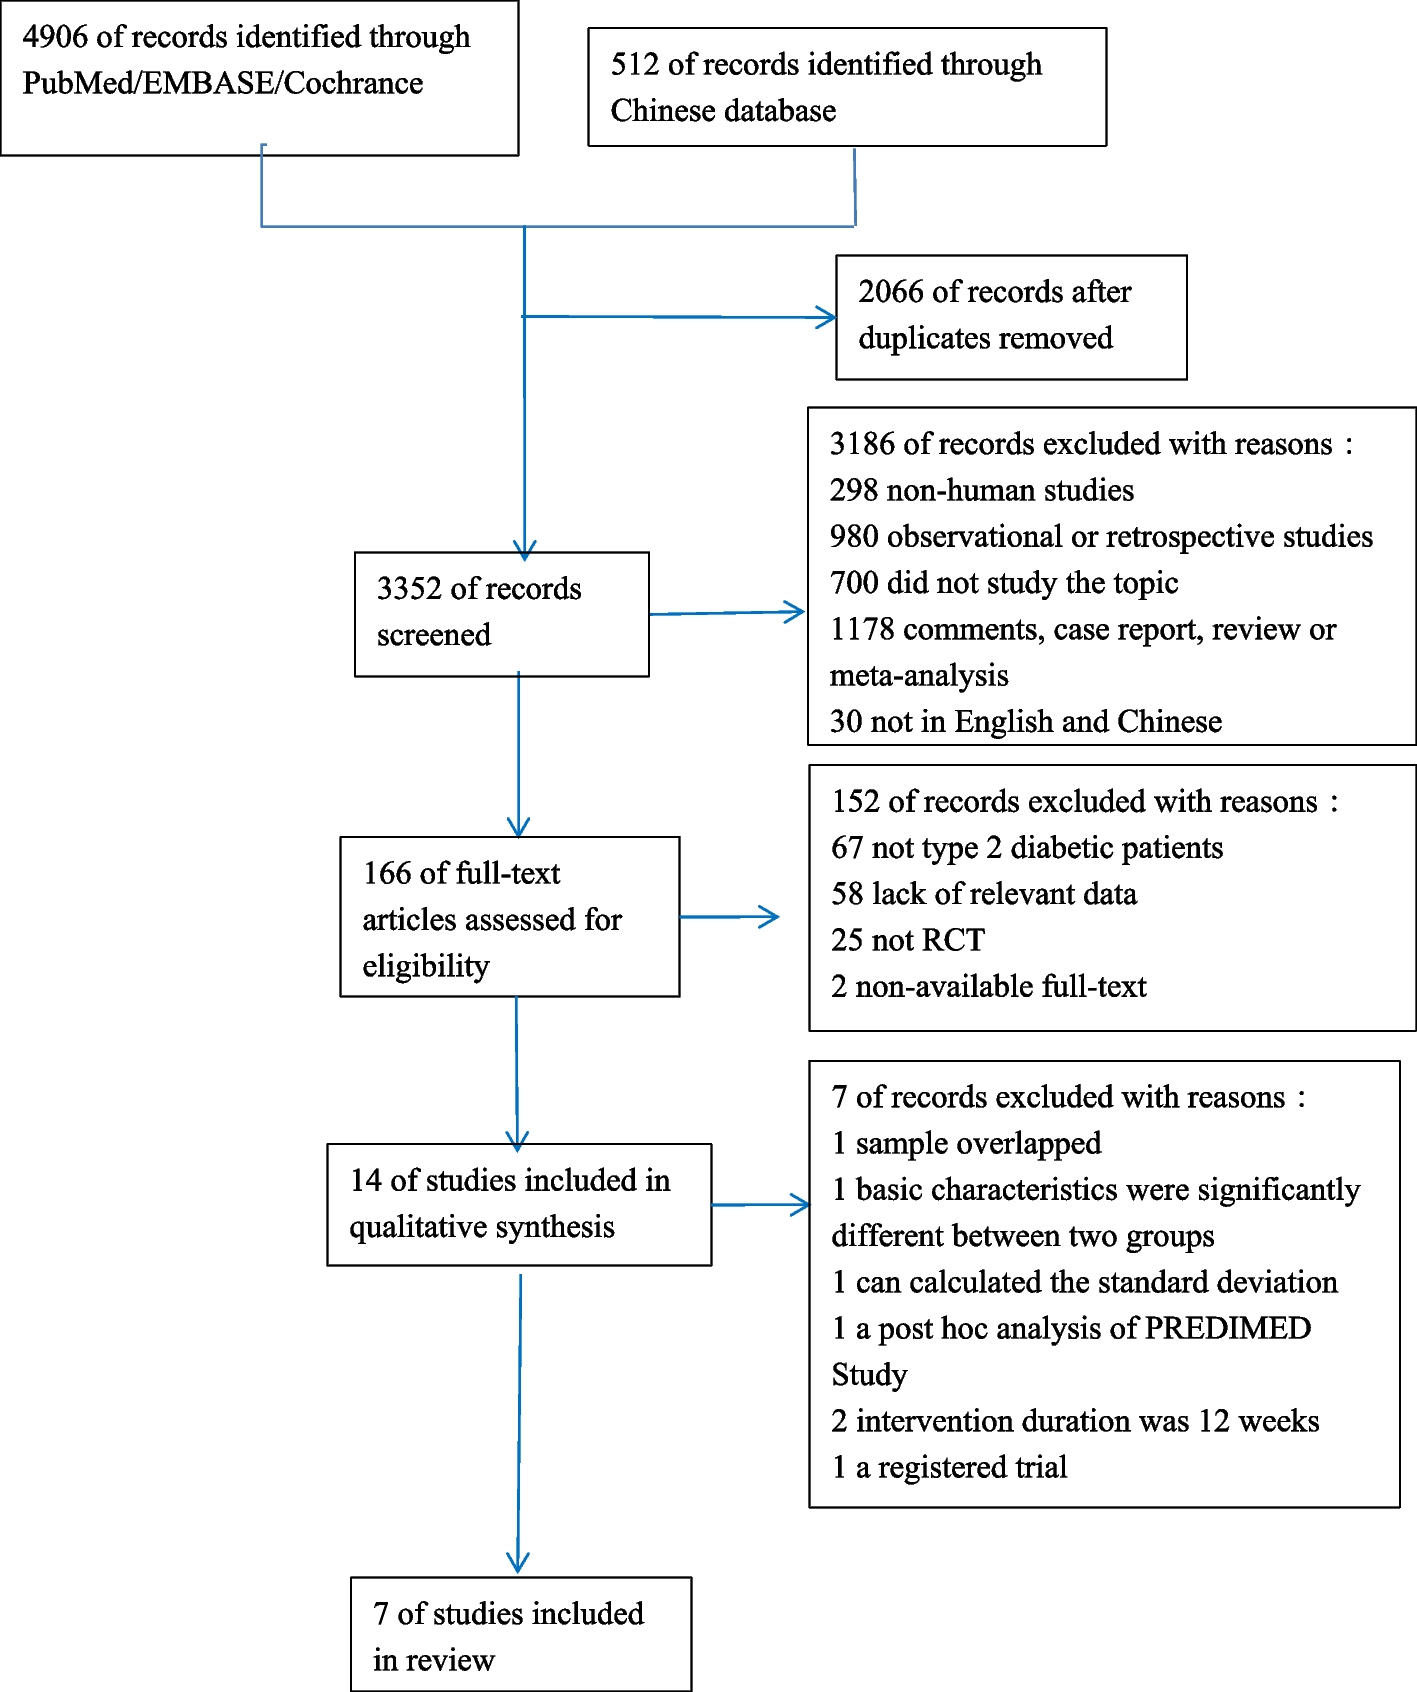 The effects of Mediterranean diet on cardiovascular risk factors, glycemic control and weight loss in patients with type 2 diabetes: a meta-analysis